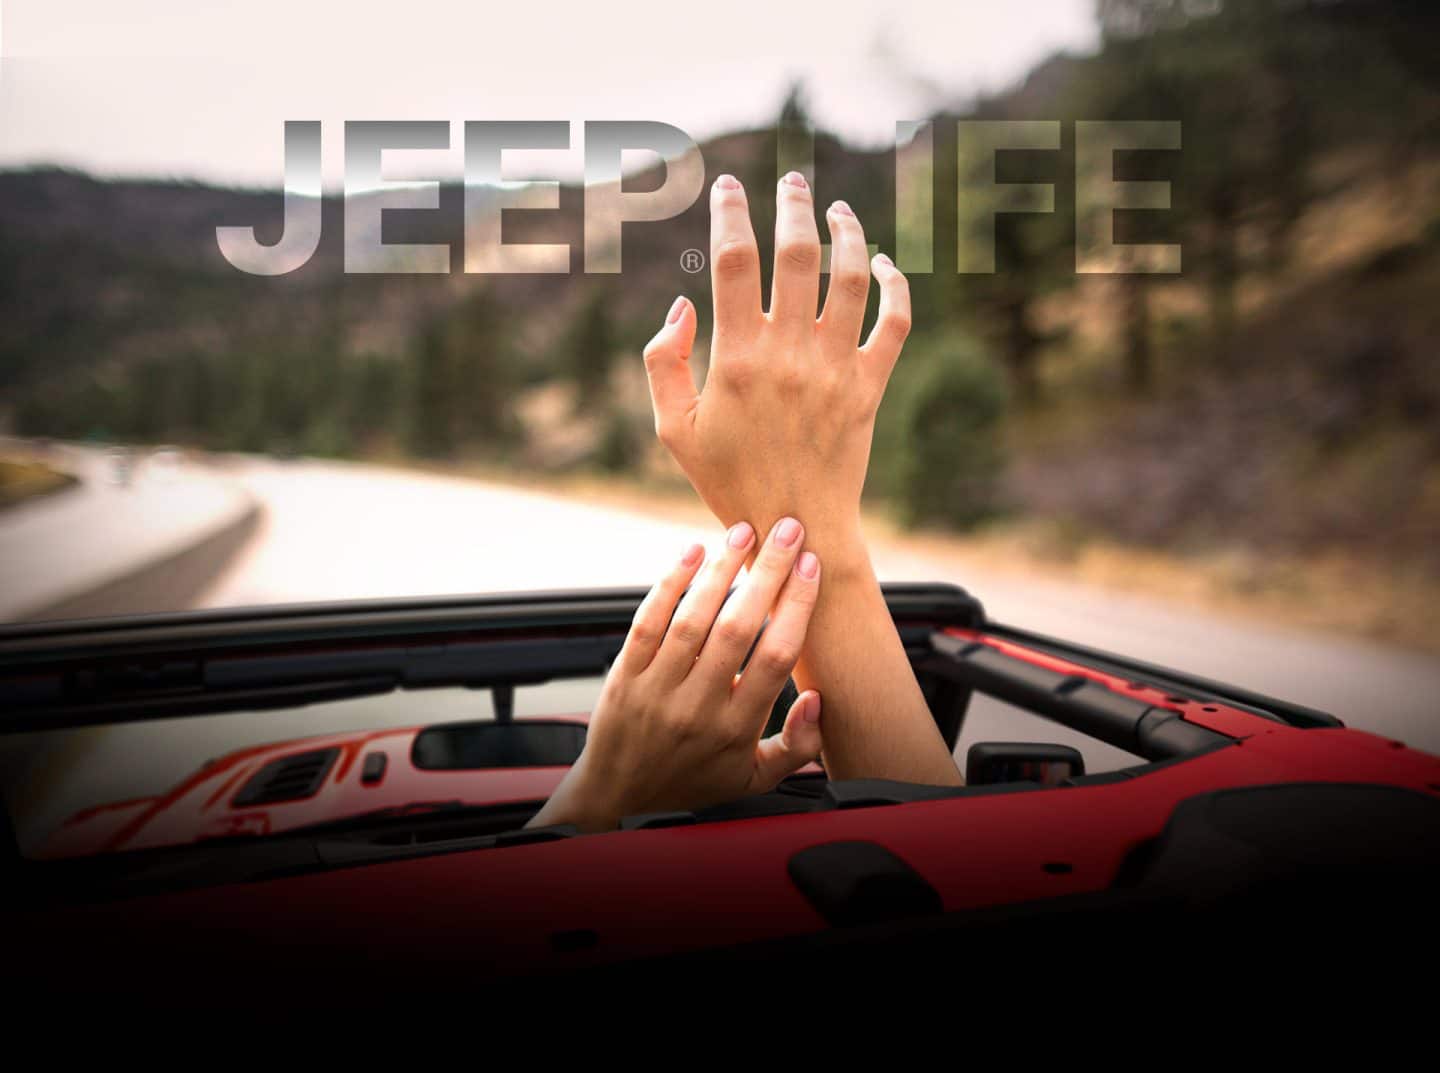 Jeep Life. A pair of hands reaching up toward the sky through the open top in a red Jeep Wrangler.